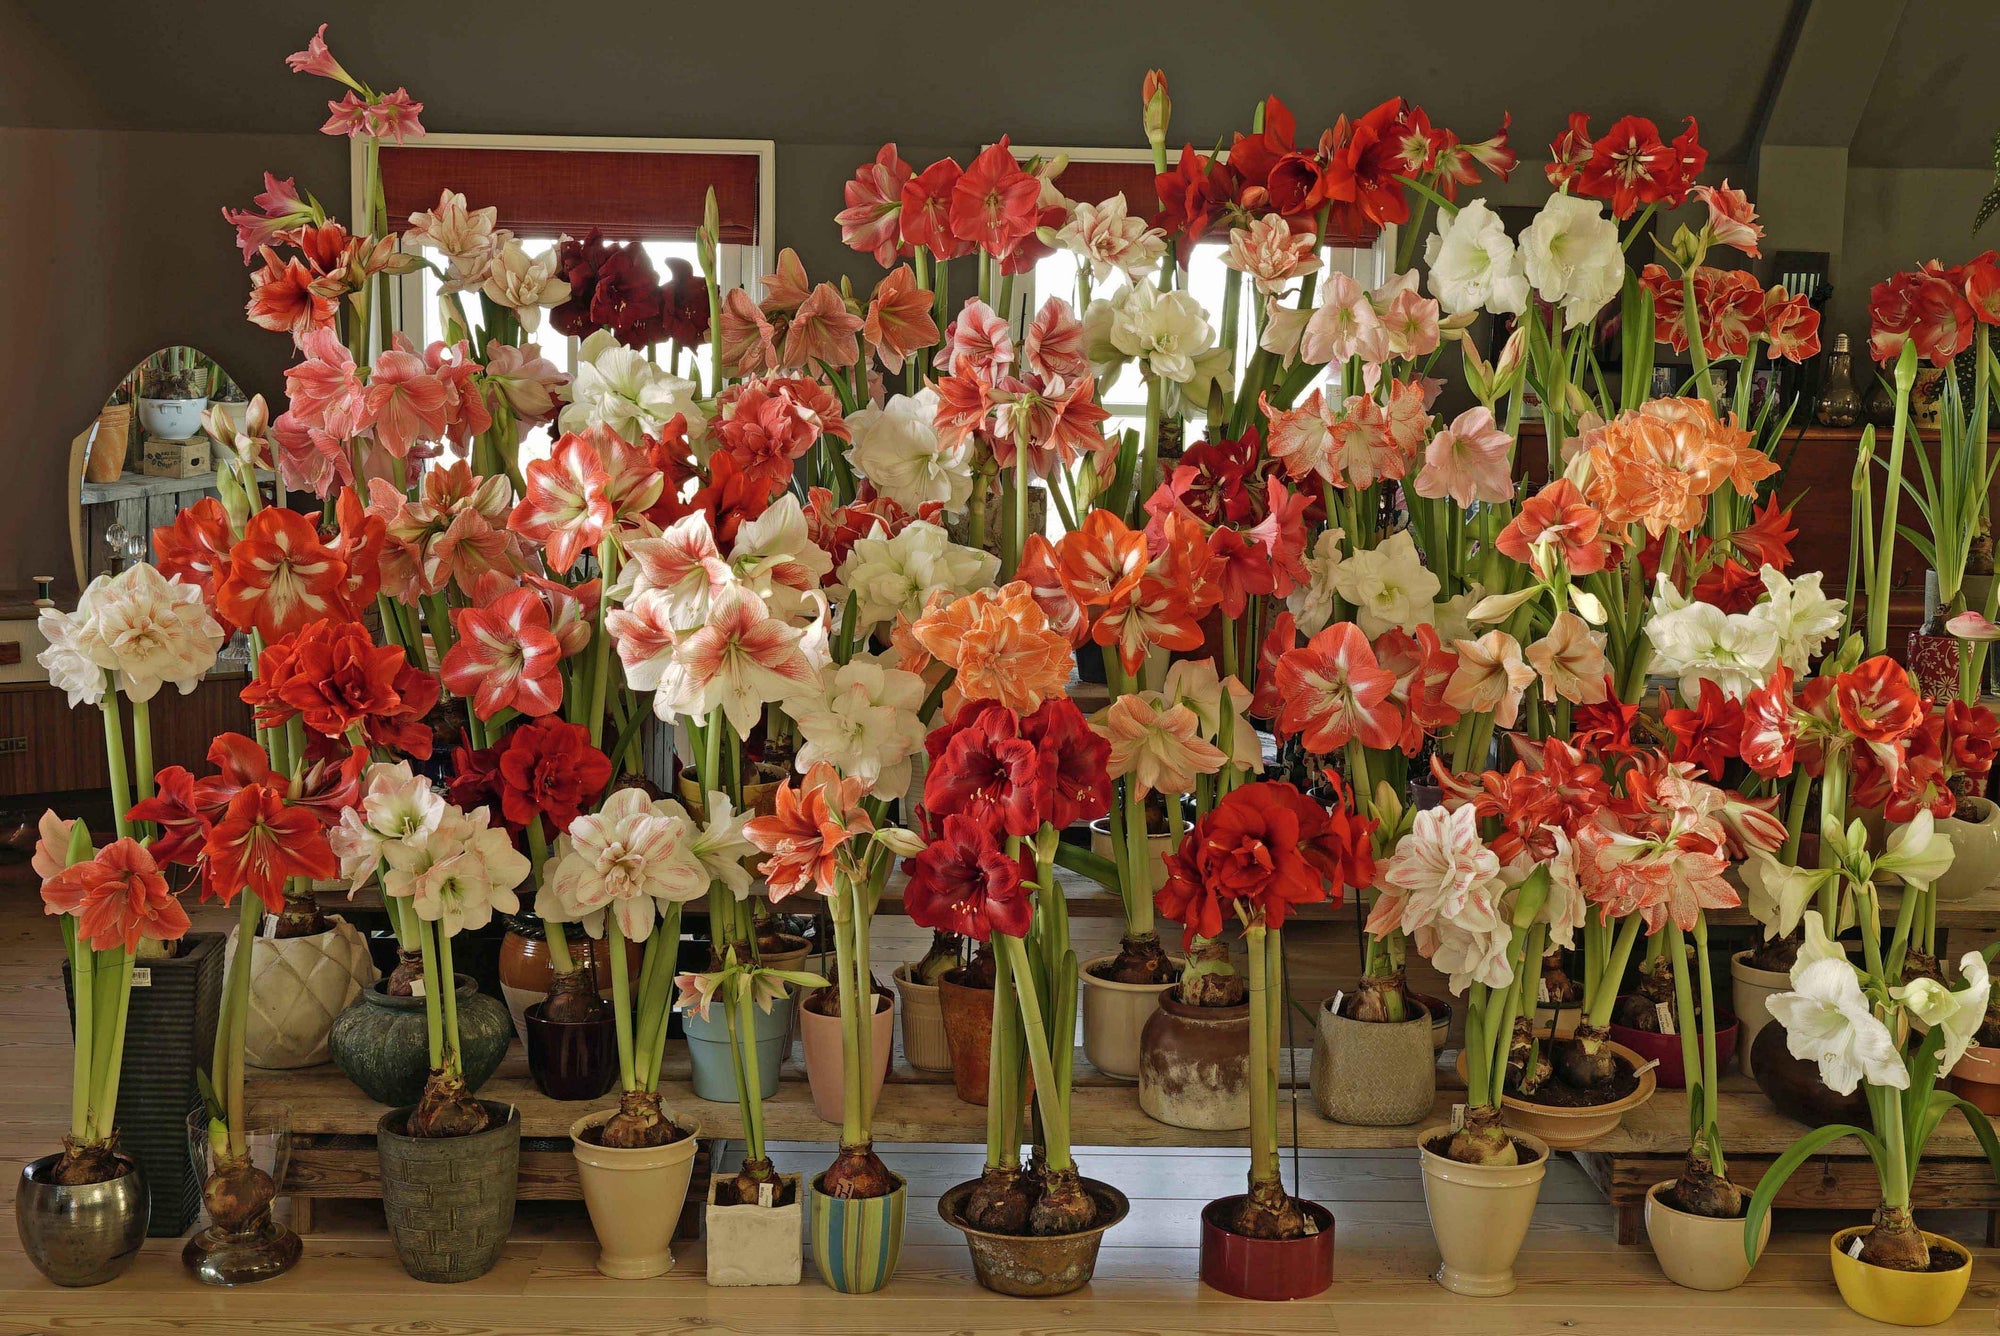 Wintertime … time for the Amaryllis